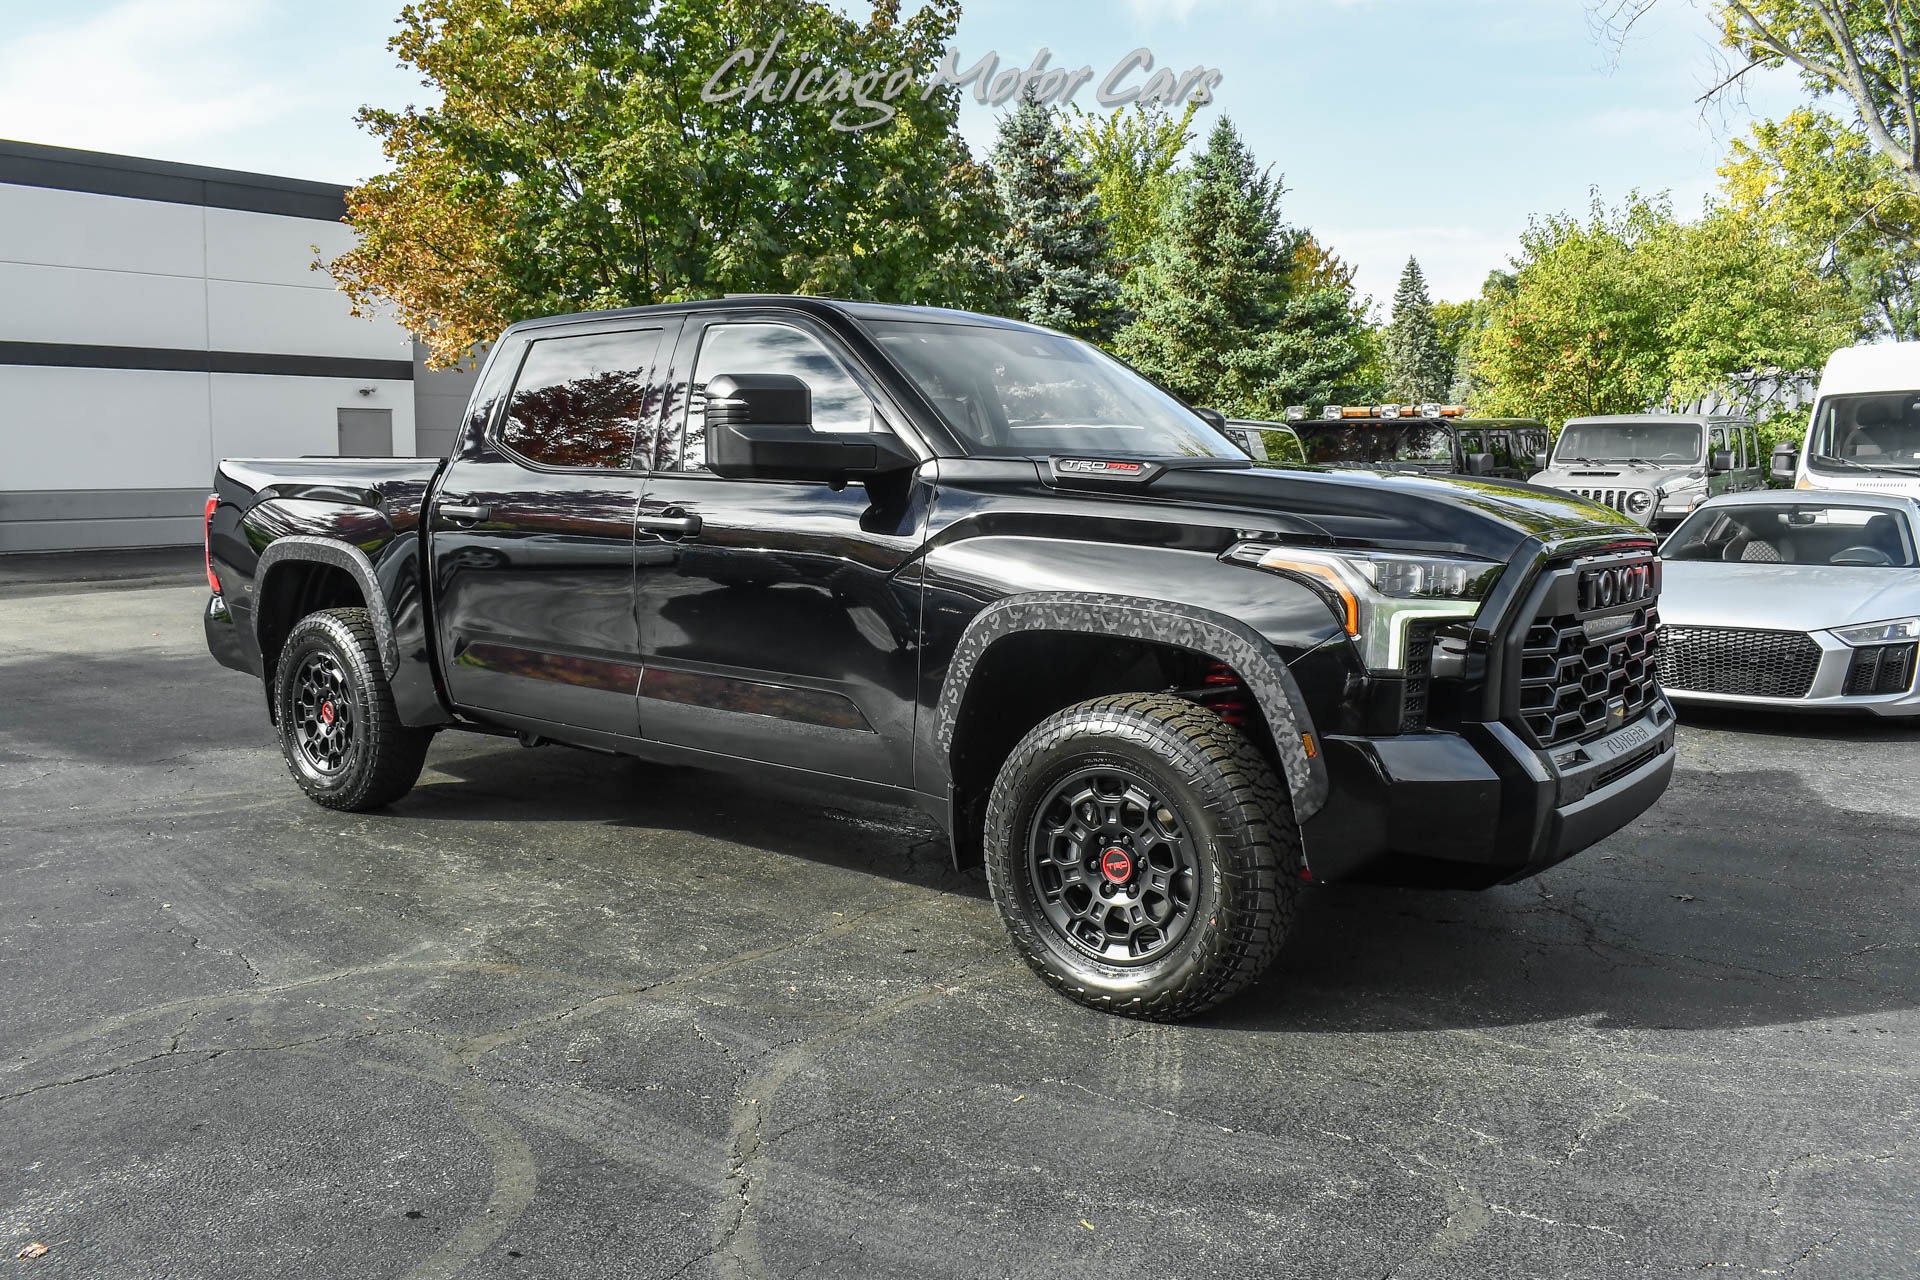 Used-2022-Toyota-Tundra-TRD-Pro-HV-4X4-Pickup-ONLY-403-Miles-Pro-Tow-Pkg-PPF-LOADED-LIKE-NEW